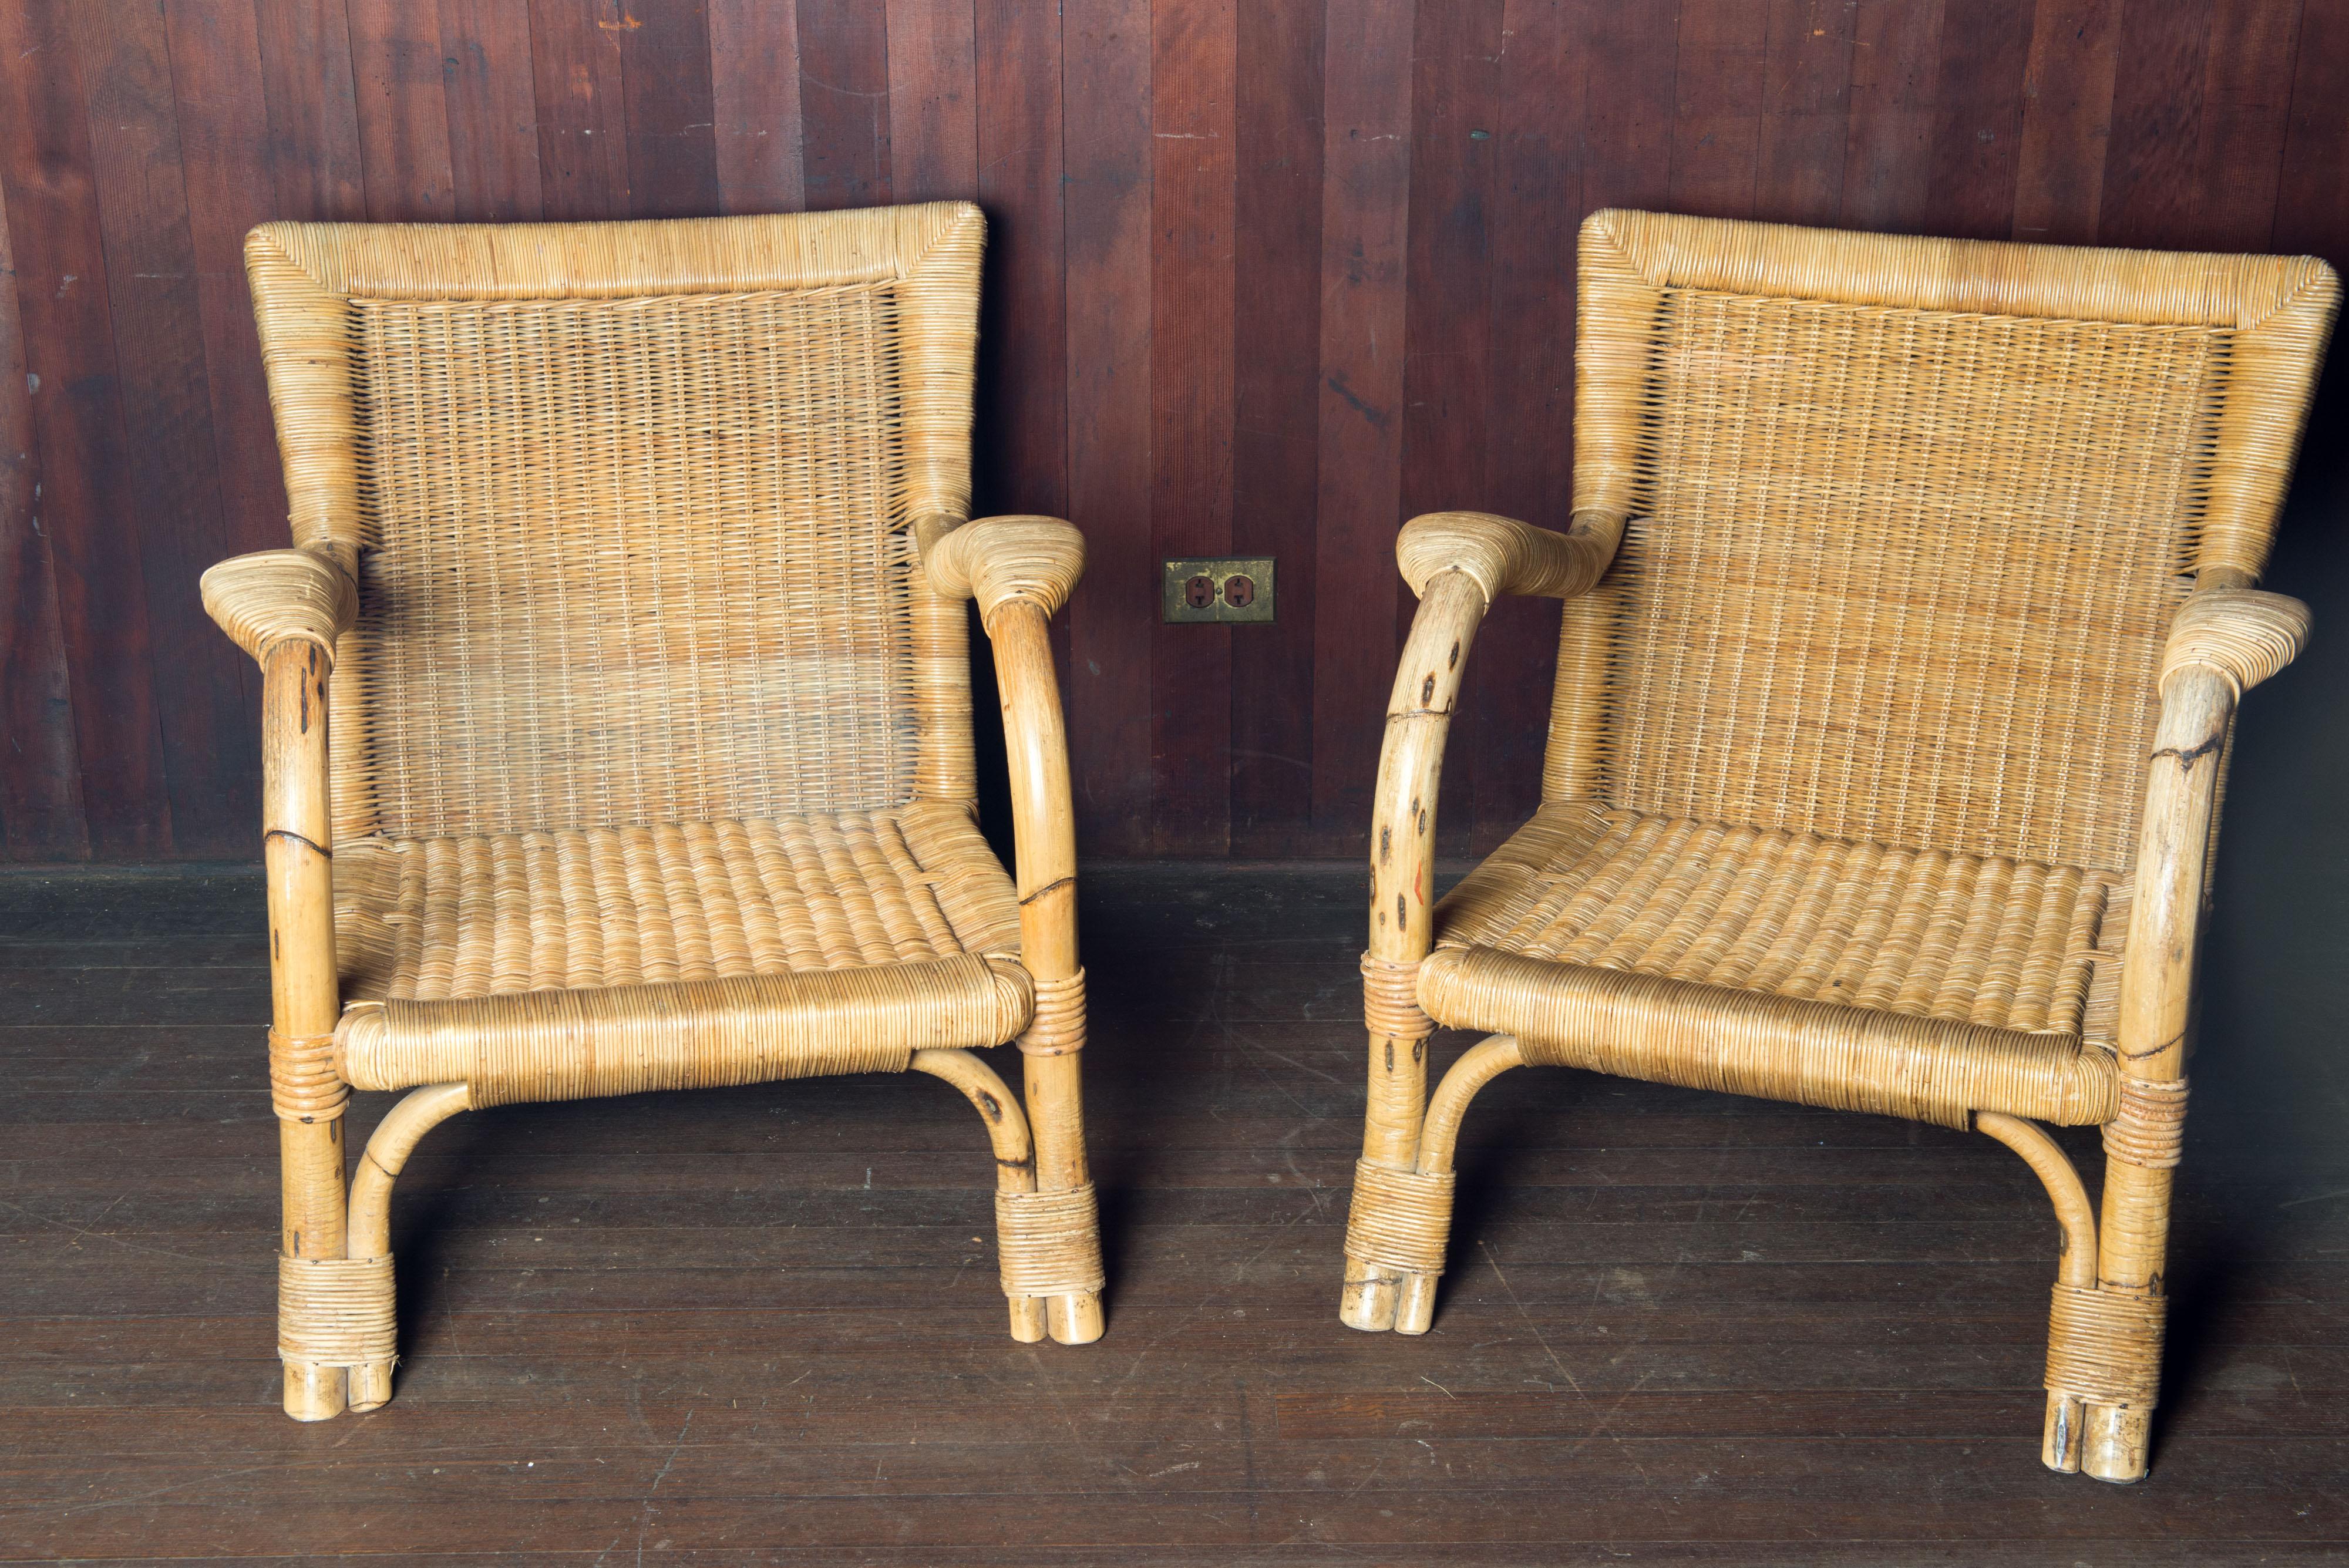 Pair of large Arco rattan and bamboo lounge chairs made in Germany found in Paris. Circa 1970 in a classic mid century style. Well made and substantial pieces made by the German company, Arco.
Seat: 22.5